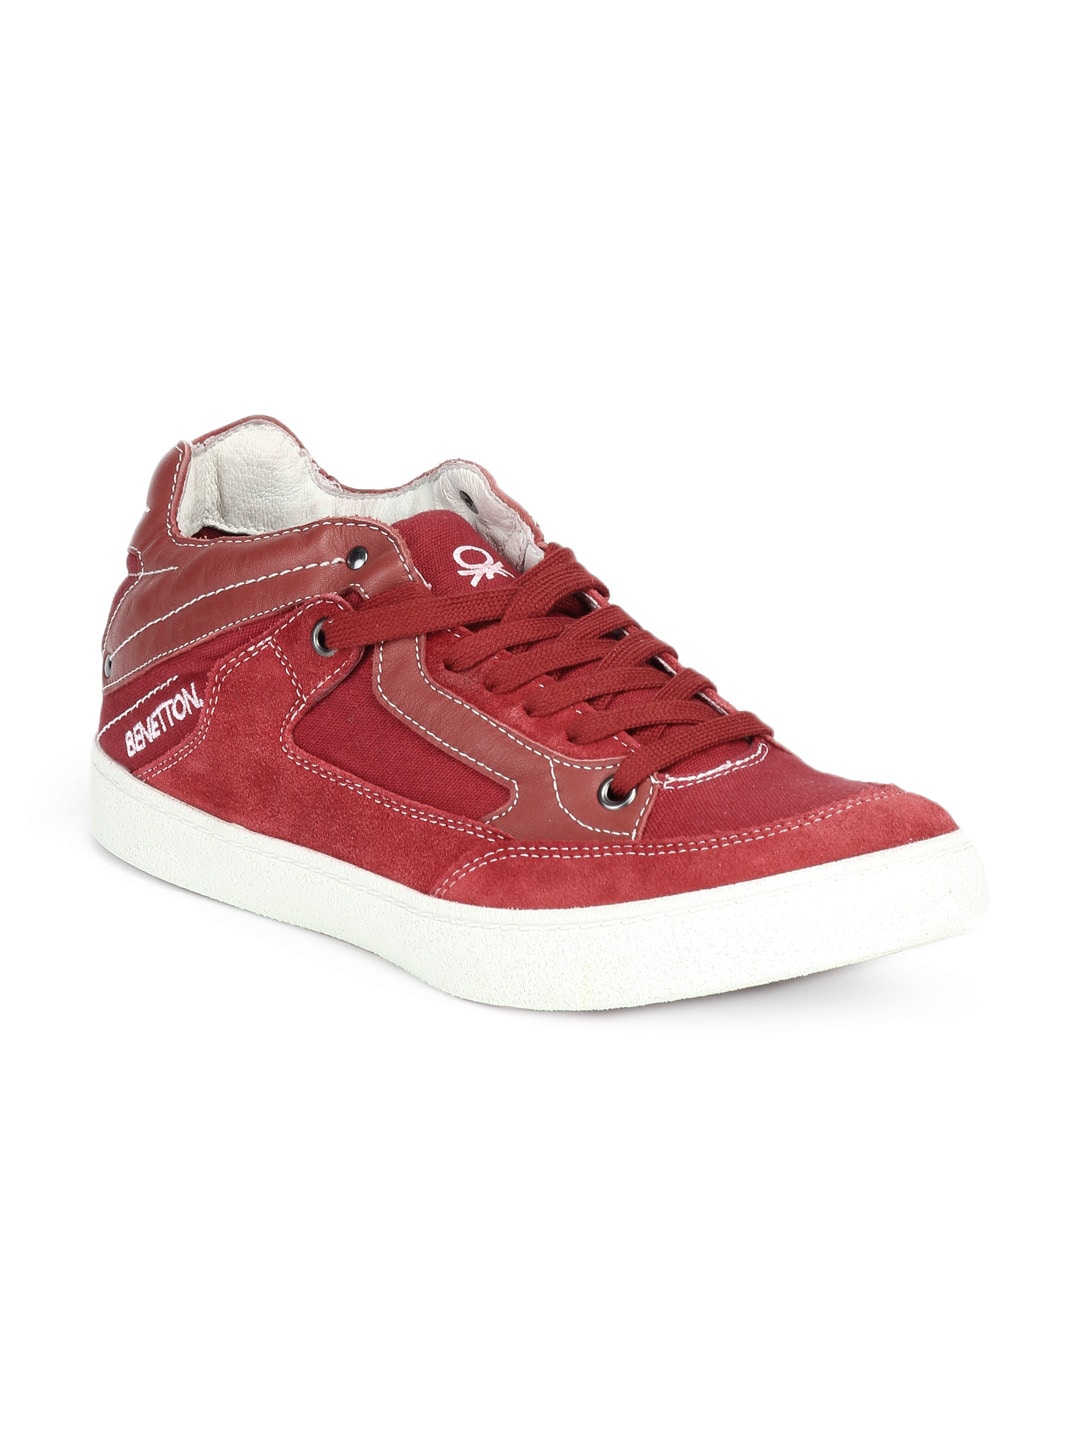 United Colors of Benetton Men Red Shoes